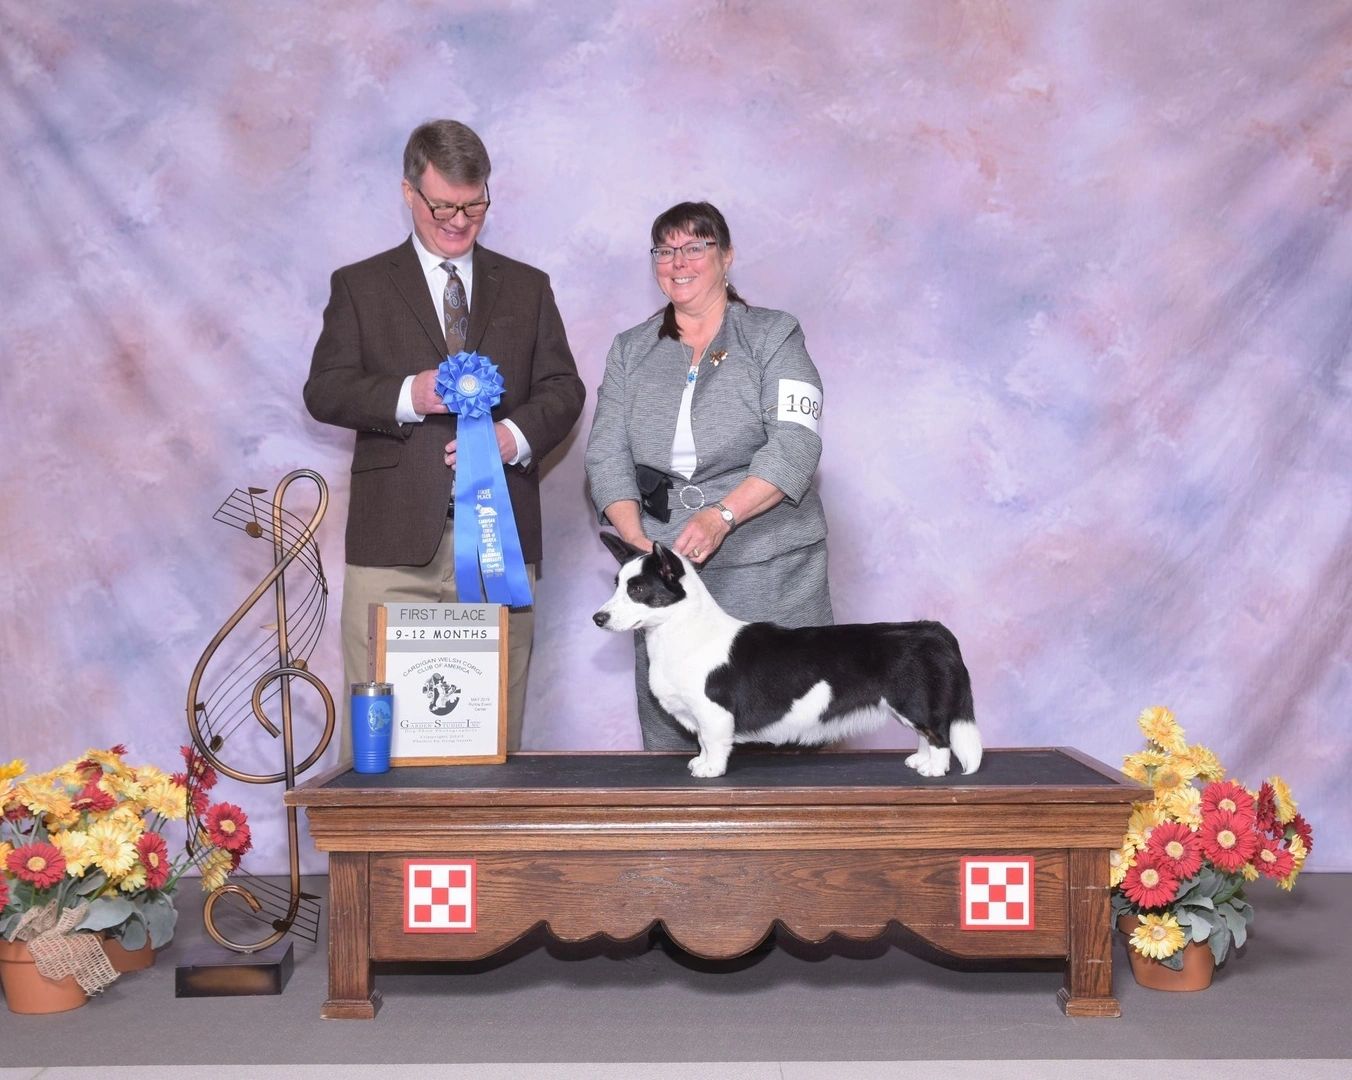 A man and woman holding a blue ribbon standing next to a dog.